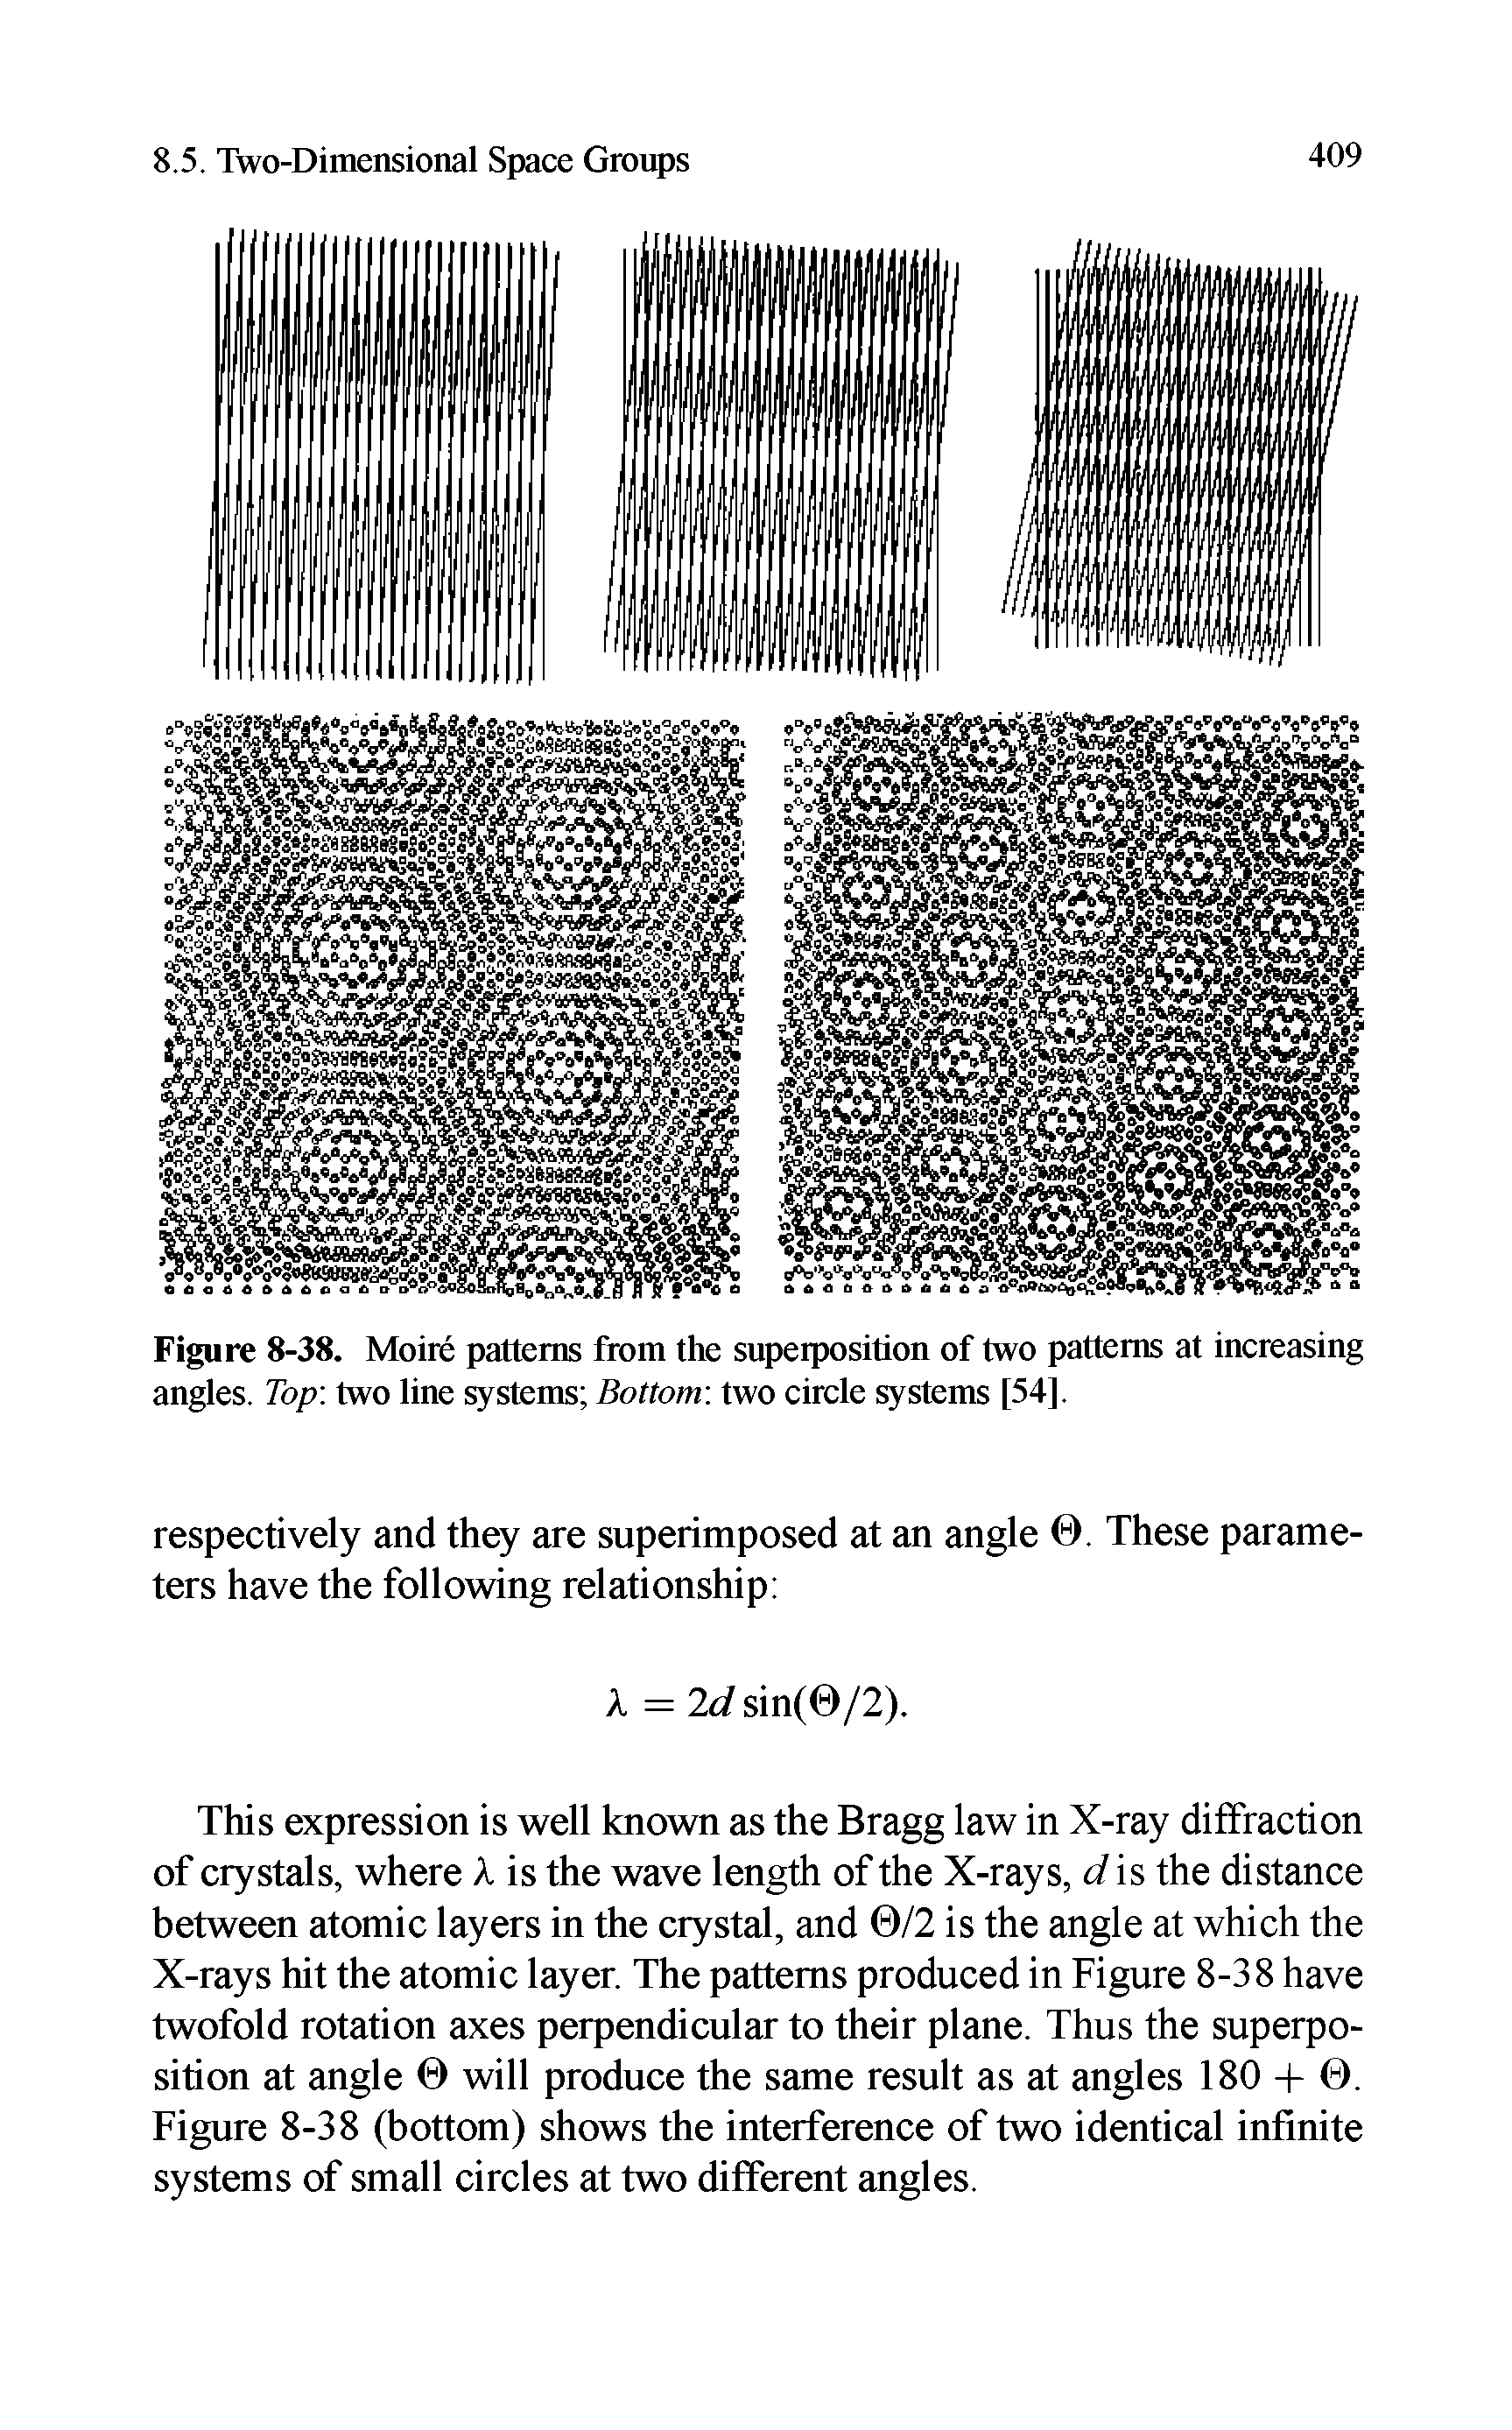 Figure 8-38. Moire patterns from the superposition of two patterns at increasing angles. Top two line systems Bottom two circle systems [54].